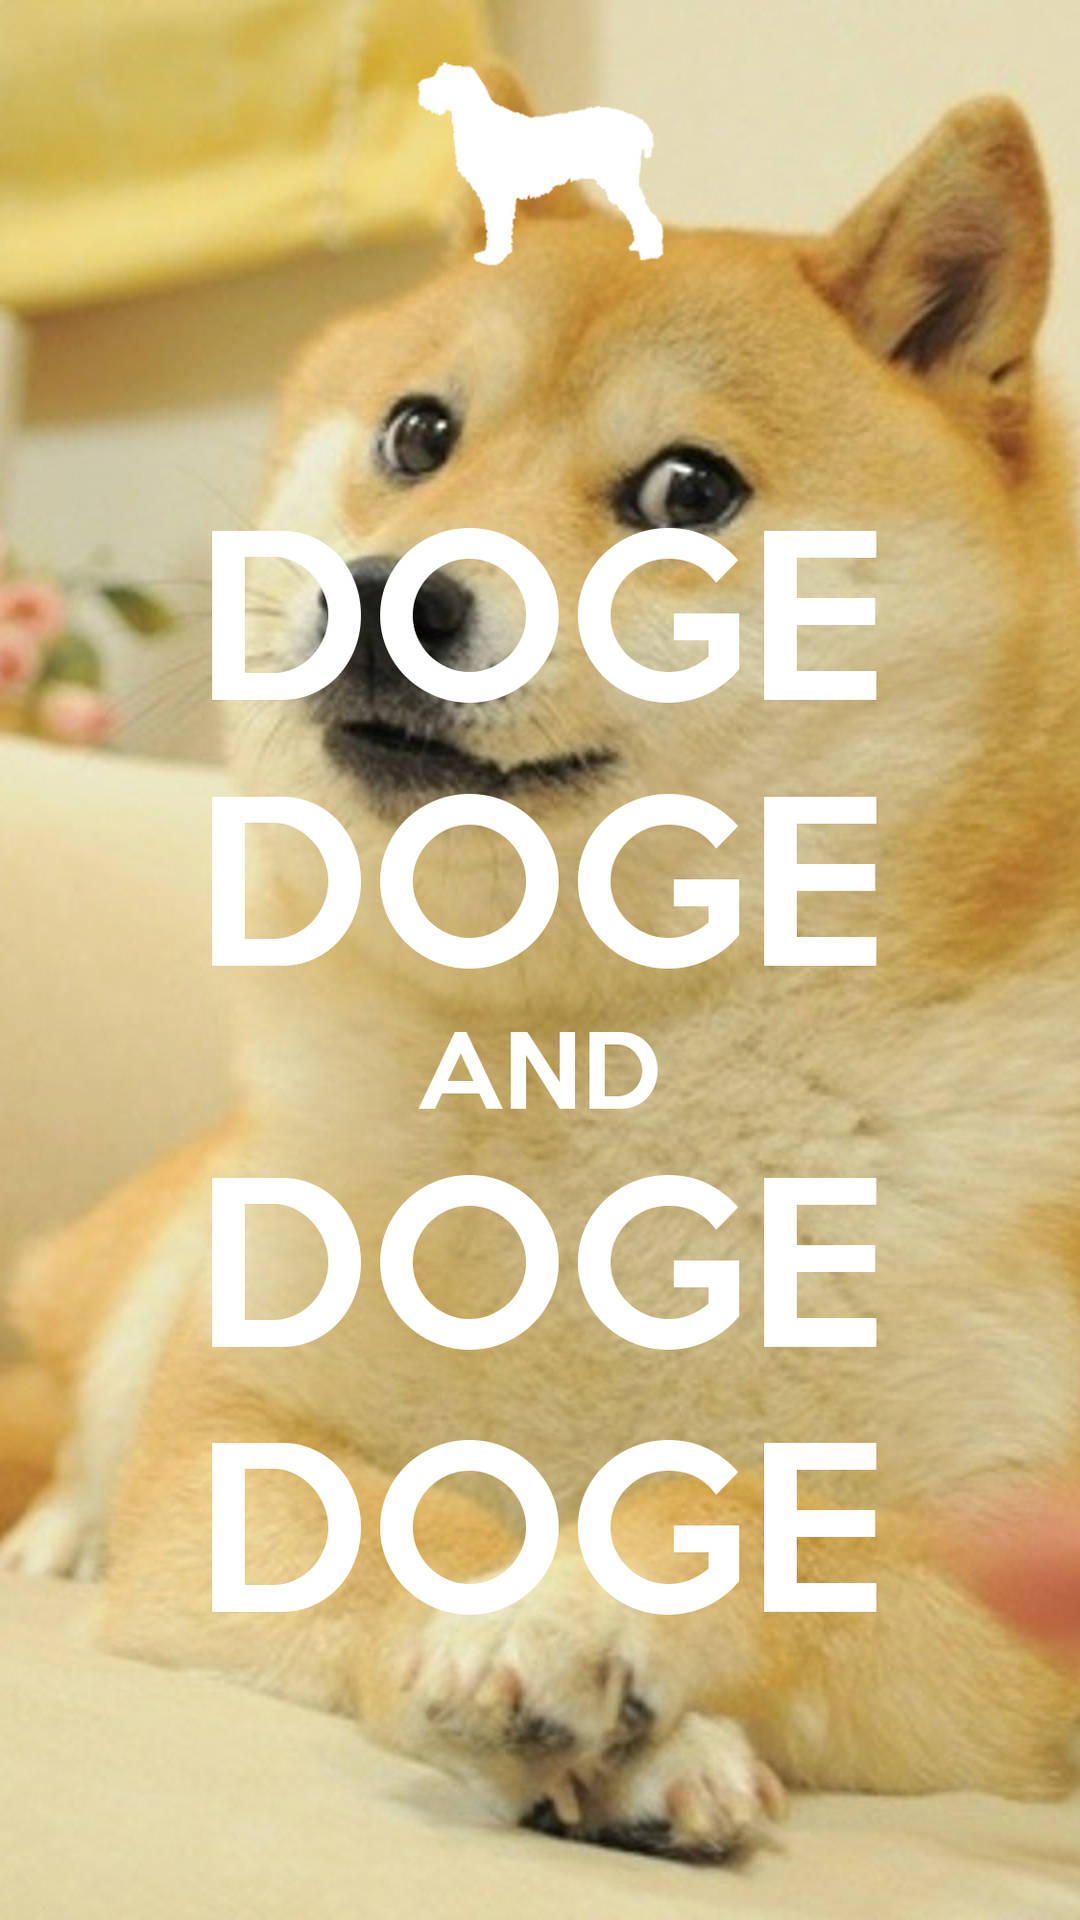 "It's time to shine, Doge!" Wallpaper